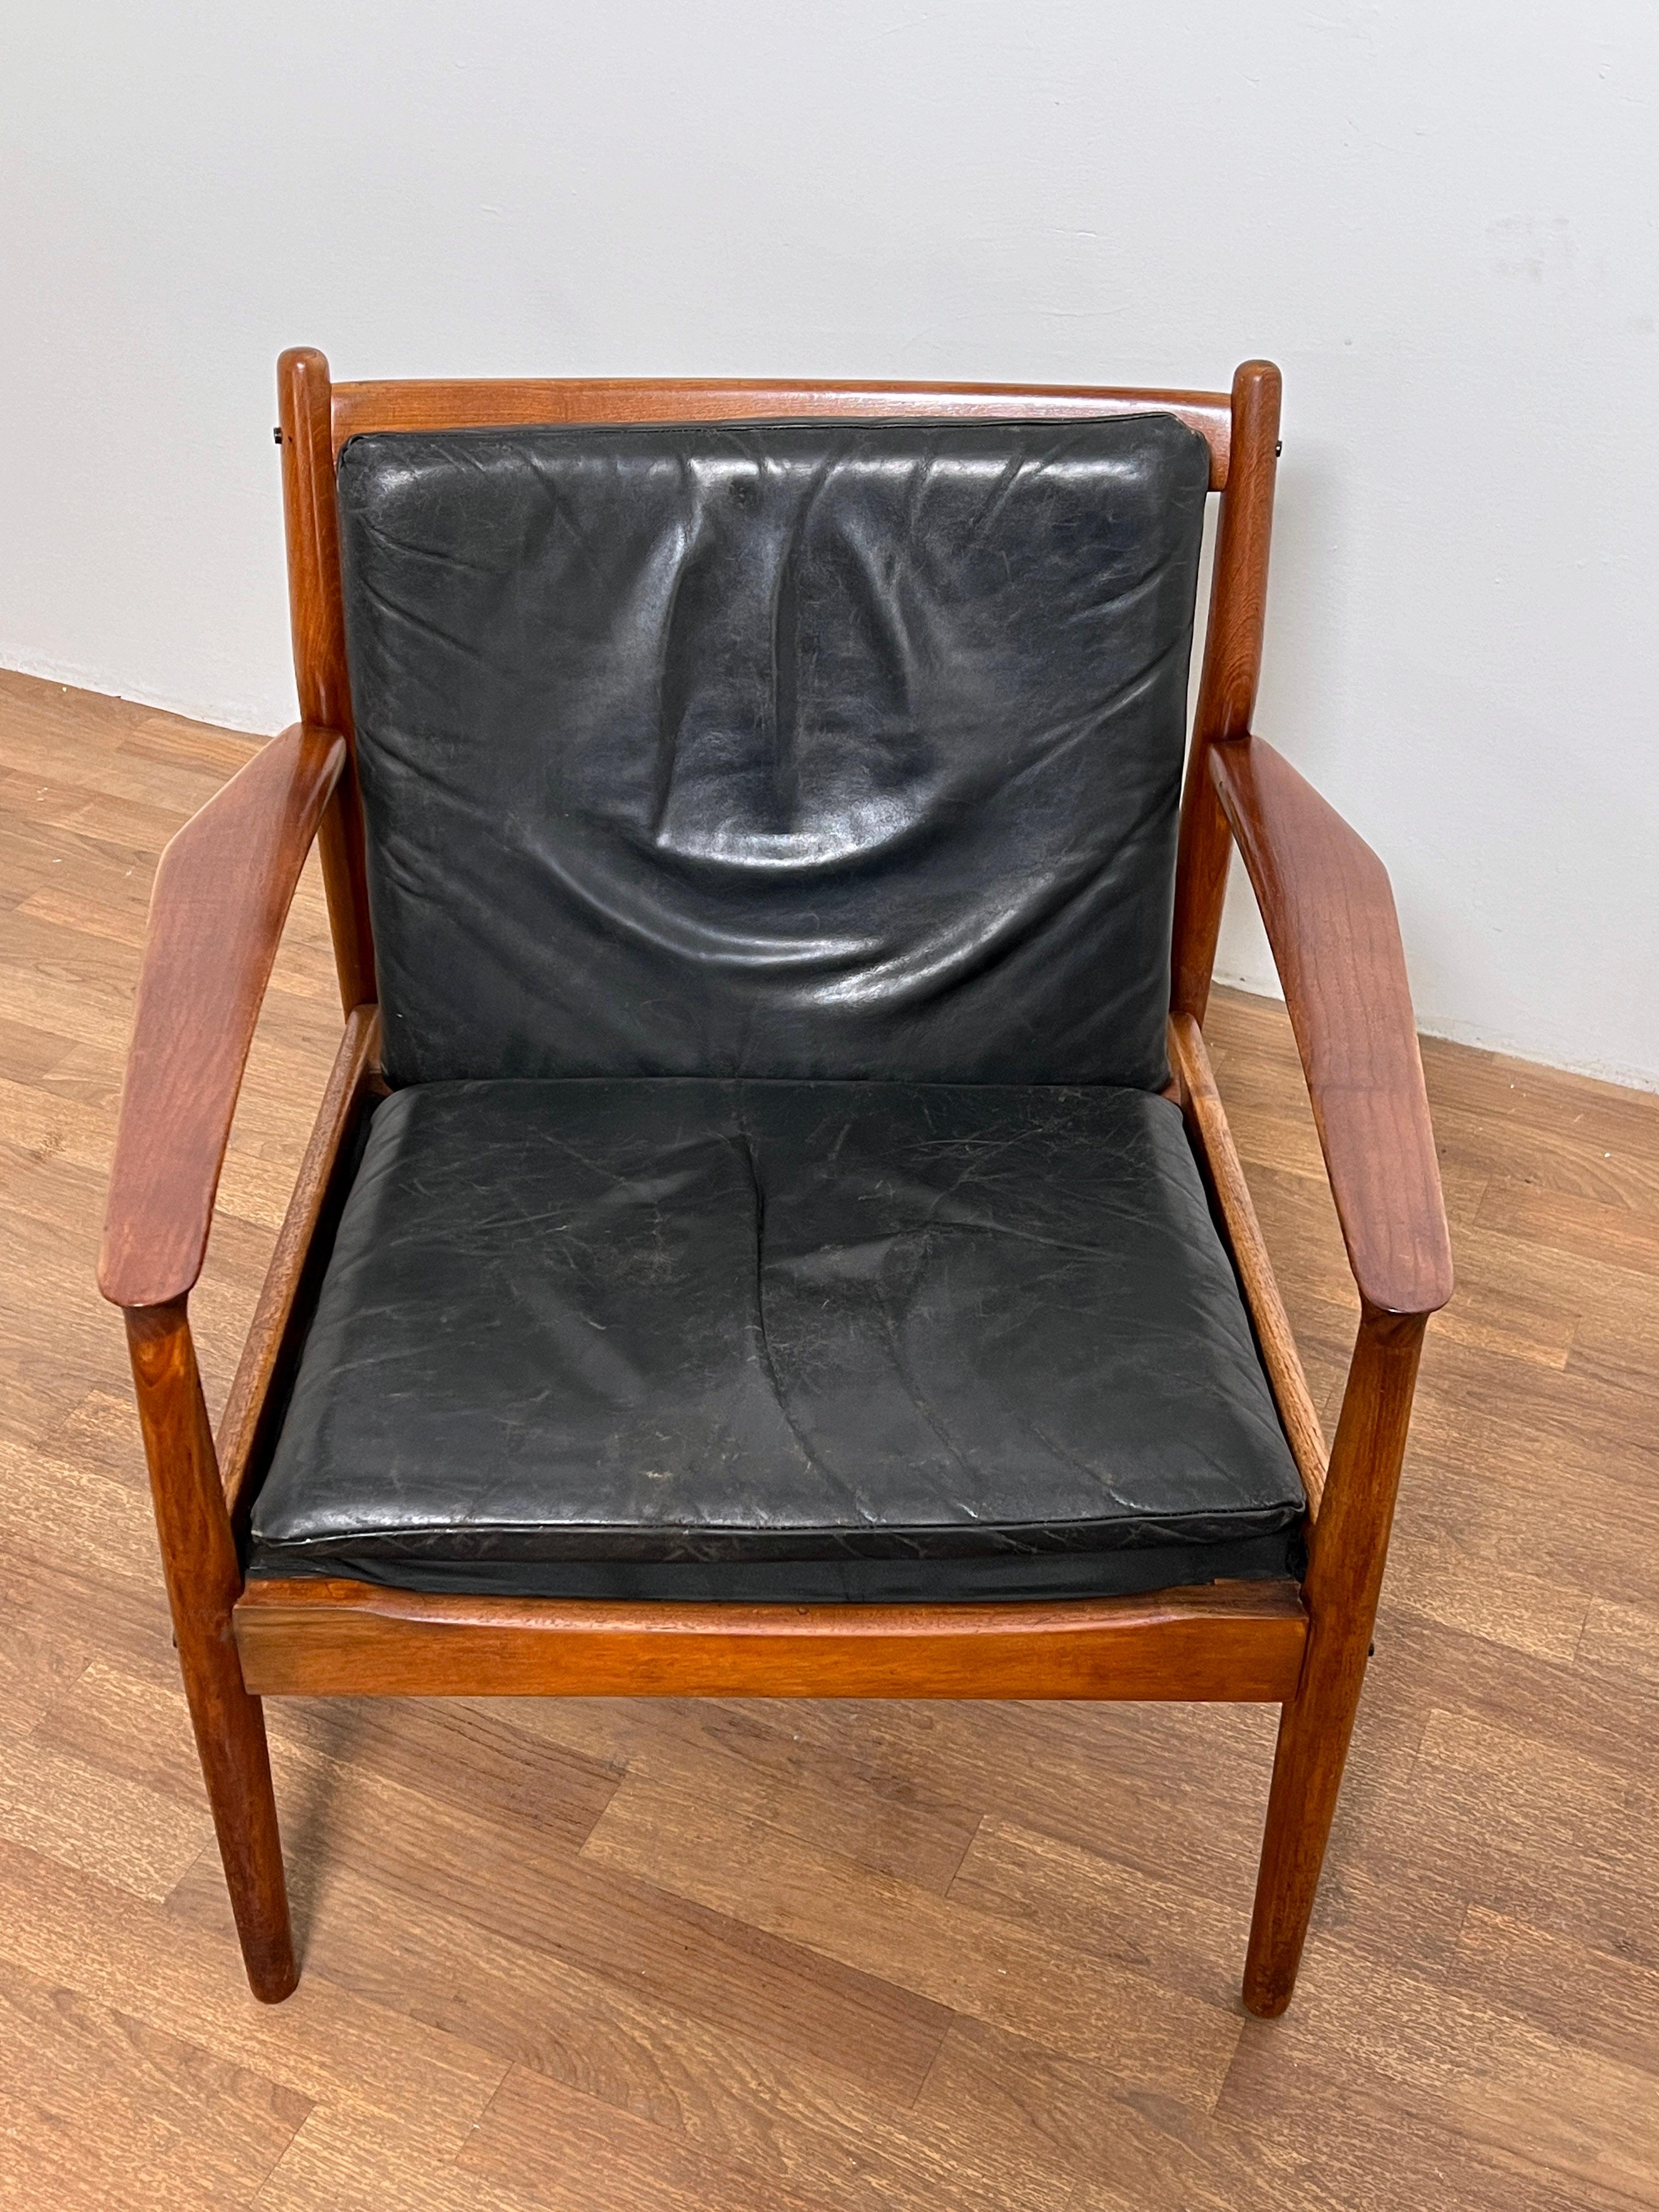 Mid-20th Century Svend Aage Eriksen for Glostrup Danish Teak and Leather Lounge Chair Circa 1960s For Sale